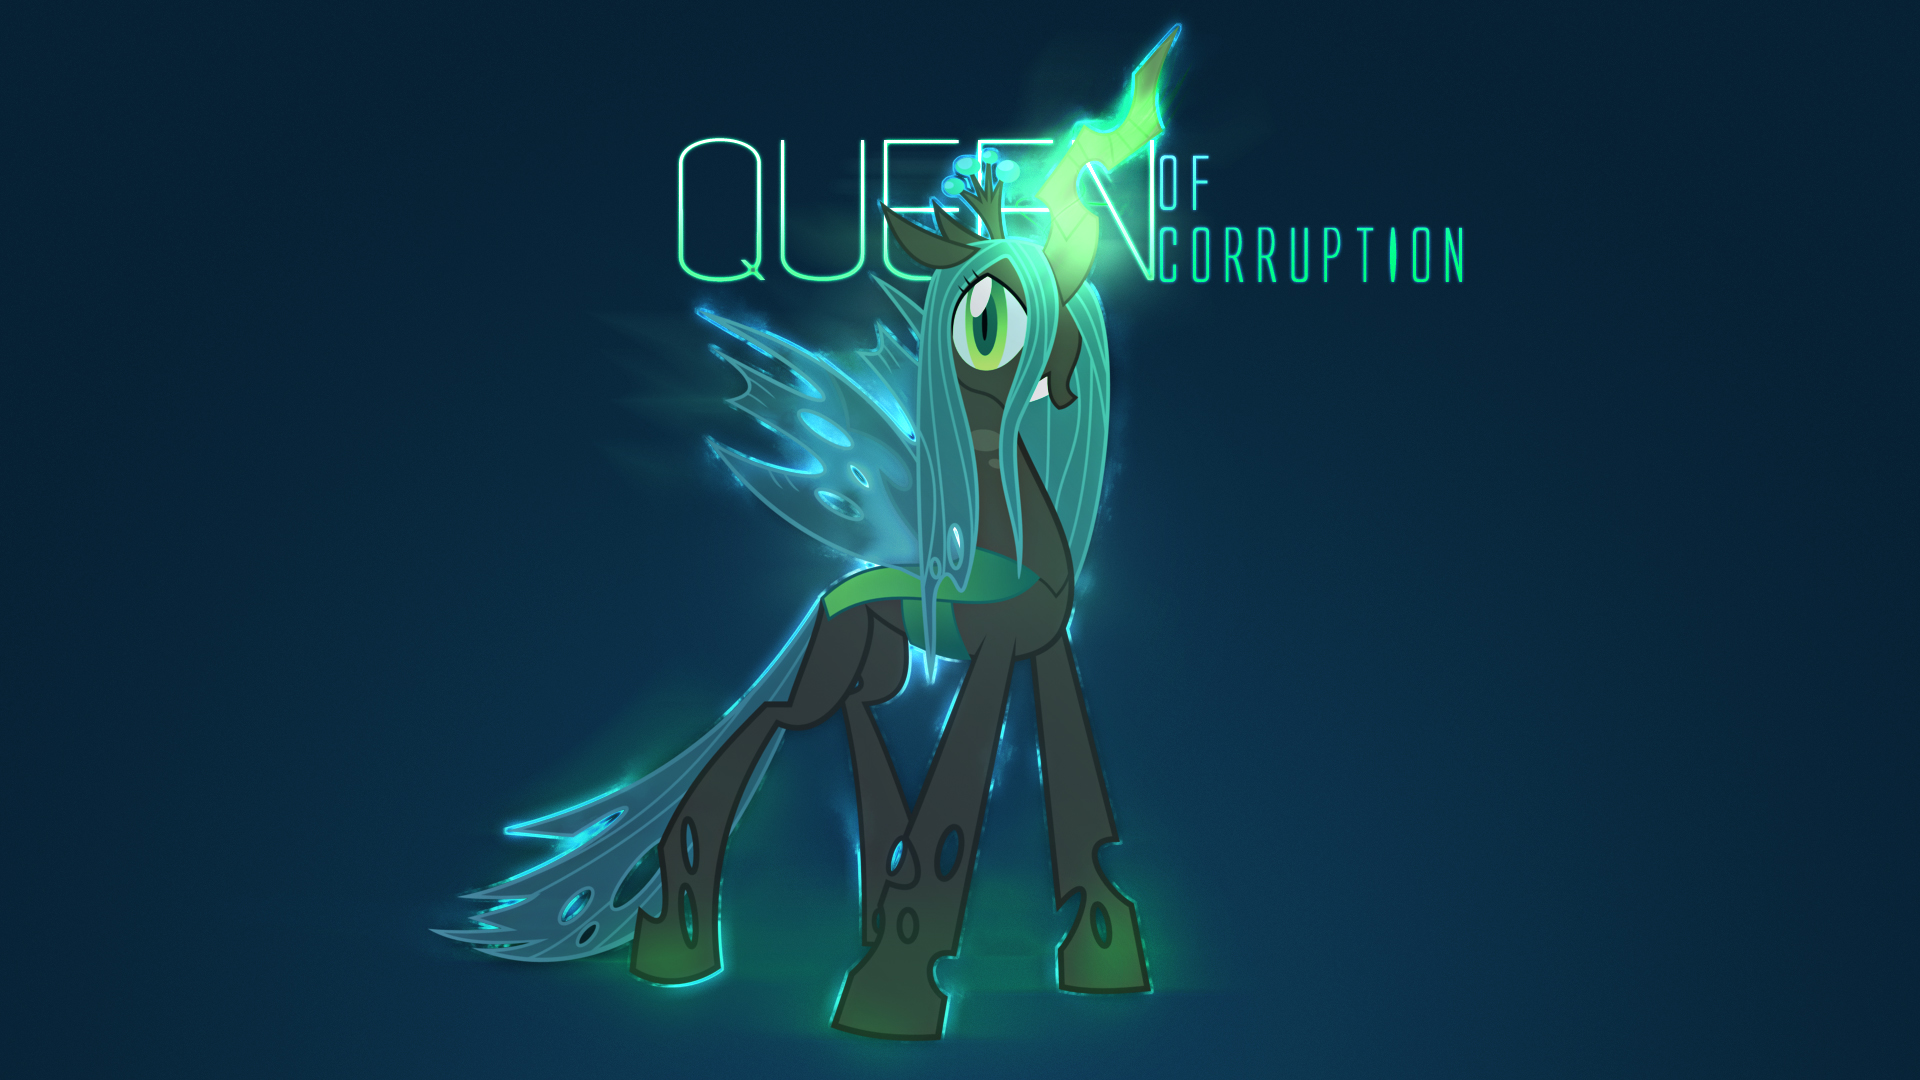 Queen Of Corruption by alexiy777 and EphemeralBlue